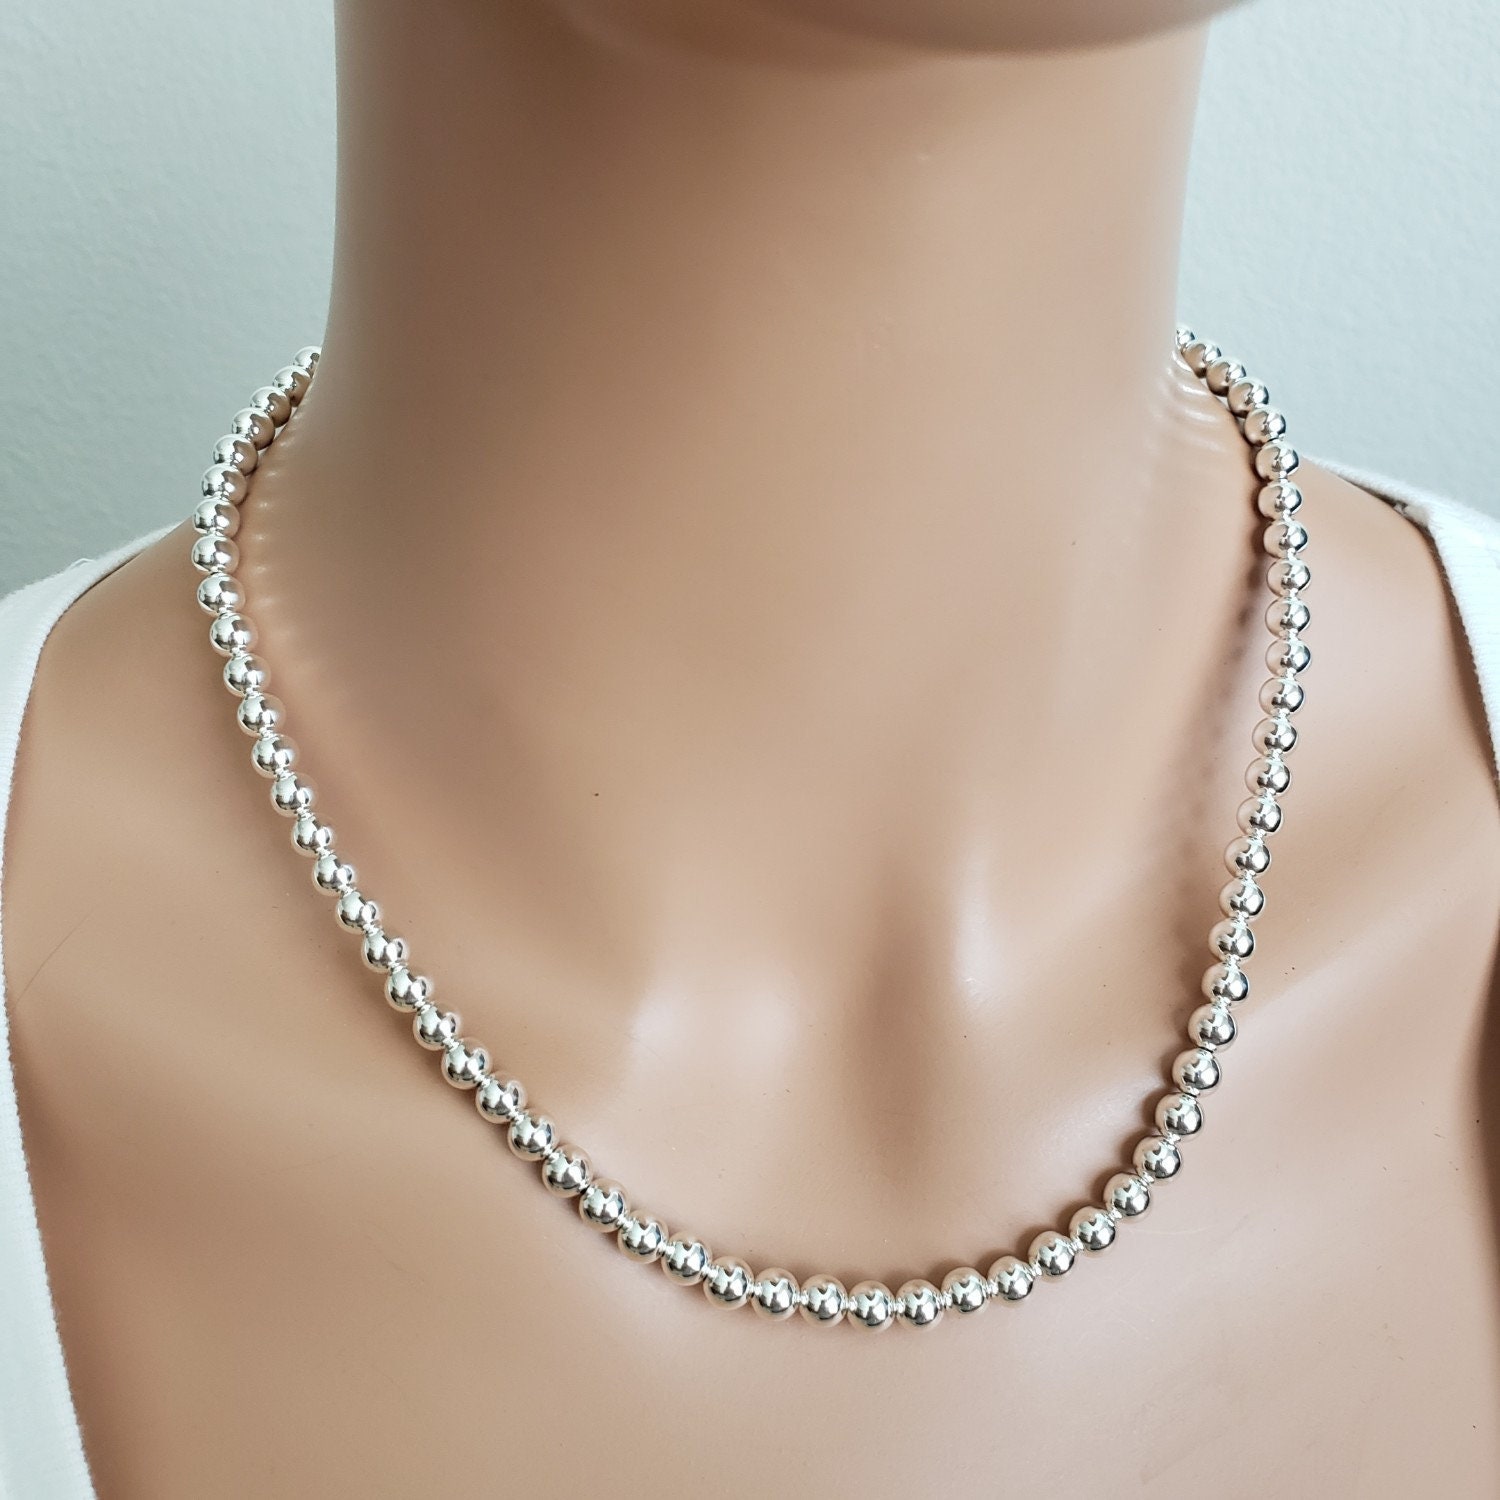 6mm Sterling Silver Bead Necklace, 6mm Bead Necklace Strand